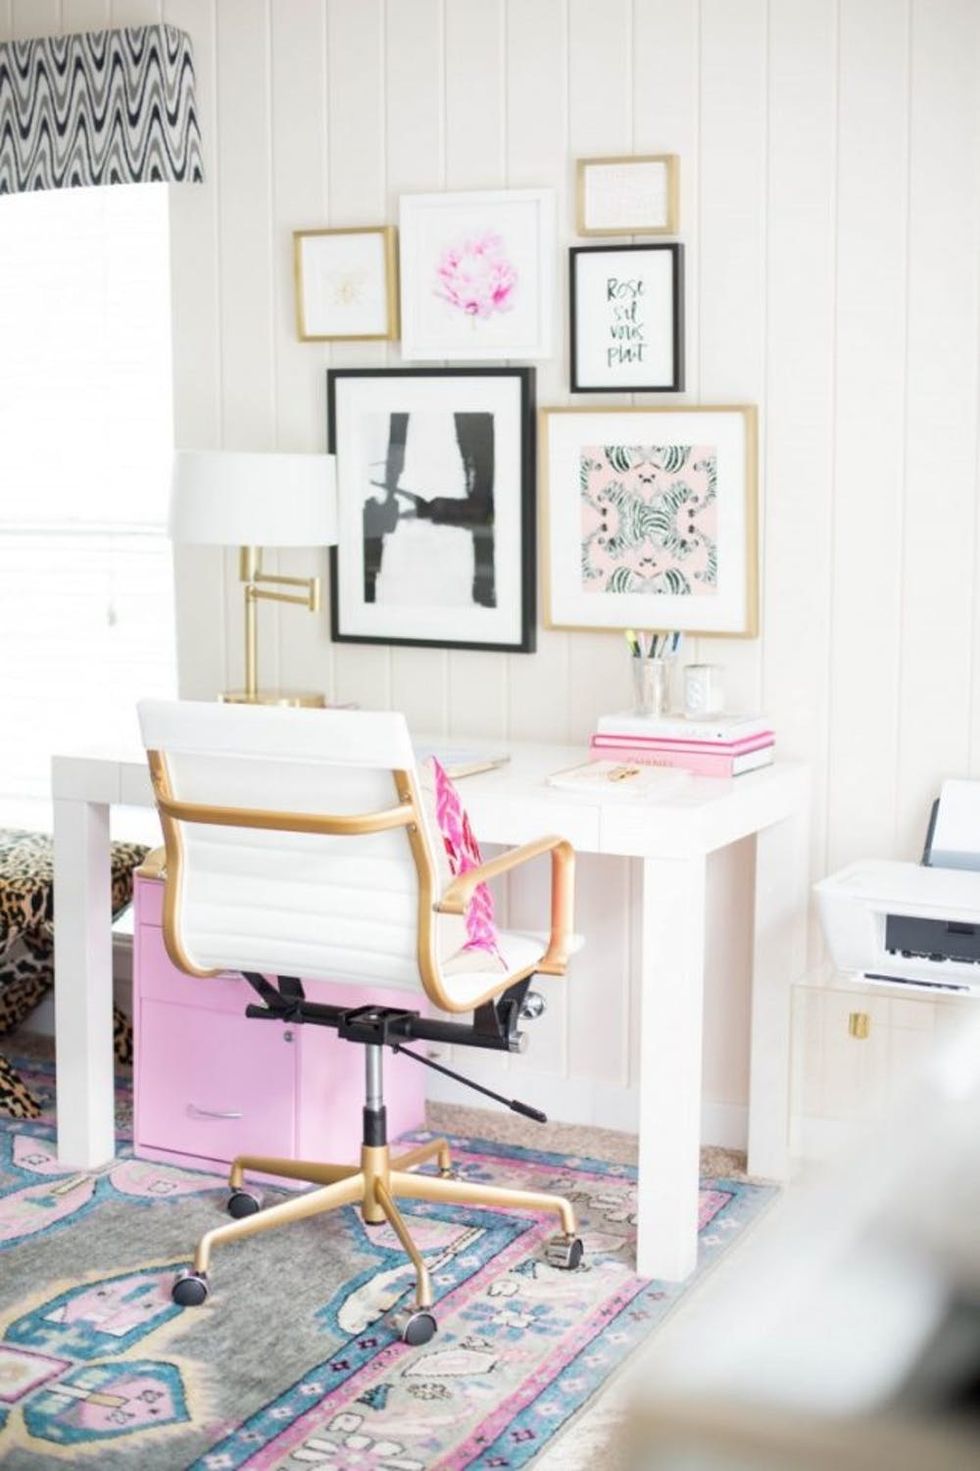 13 Kate Spade New York Inspired Office Decor Ideas For The Hbic